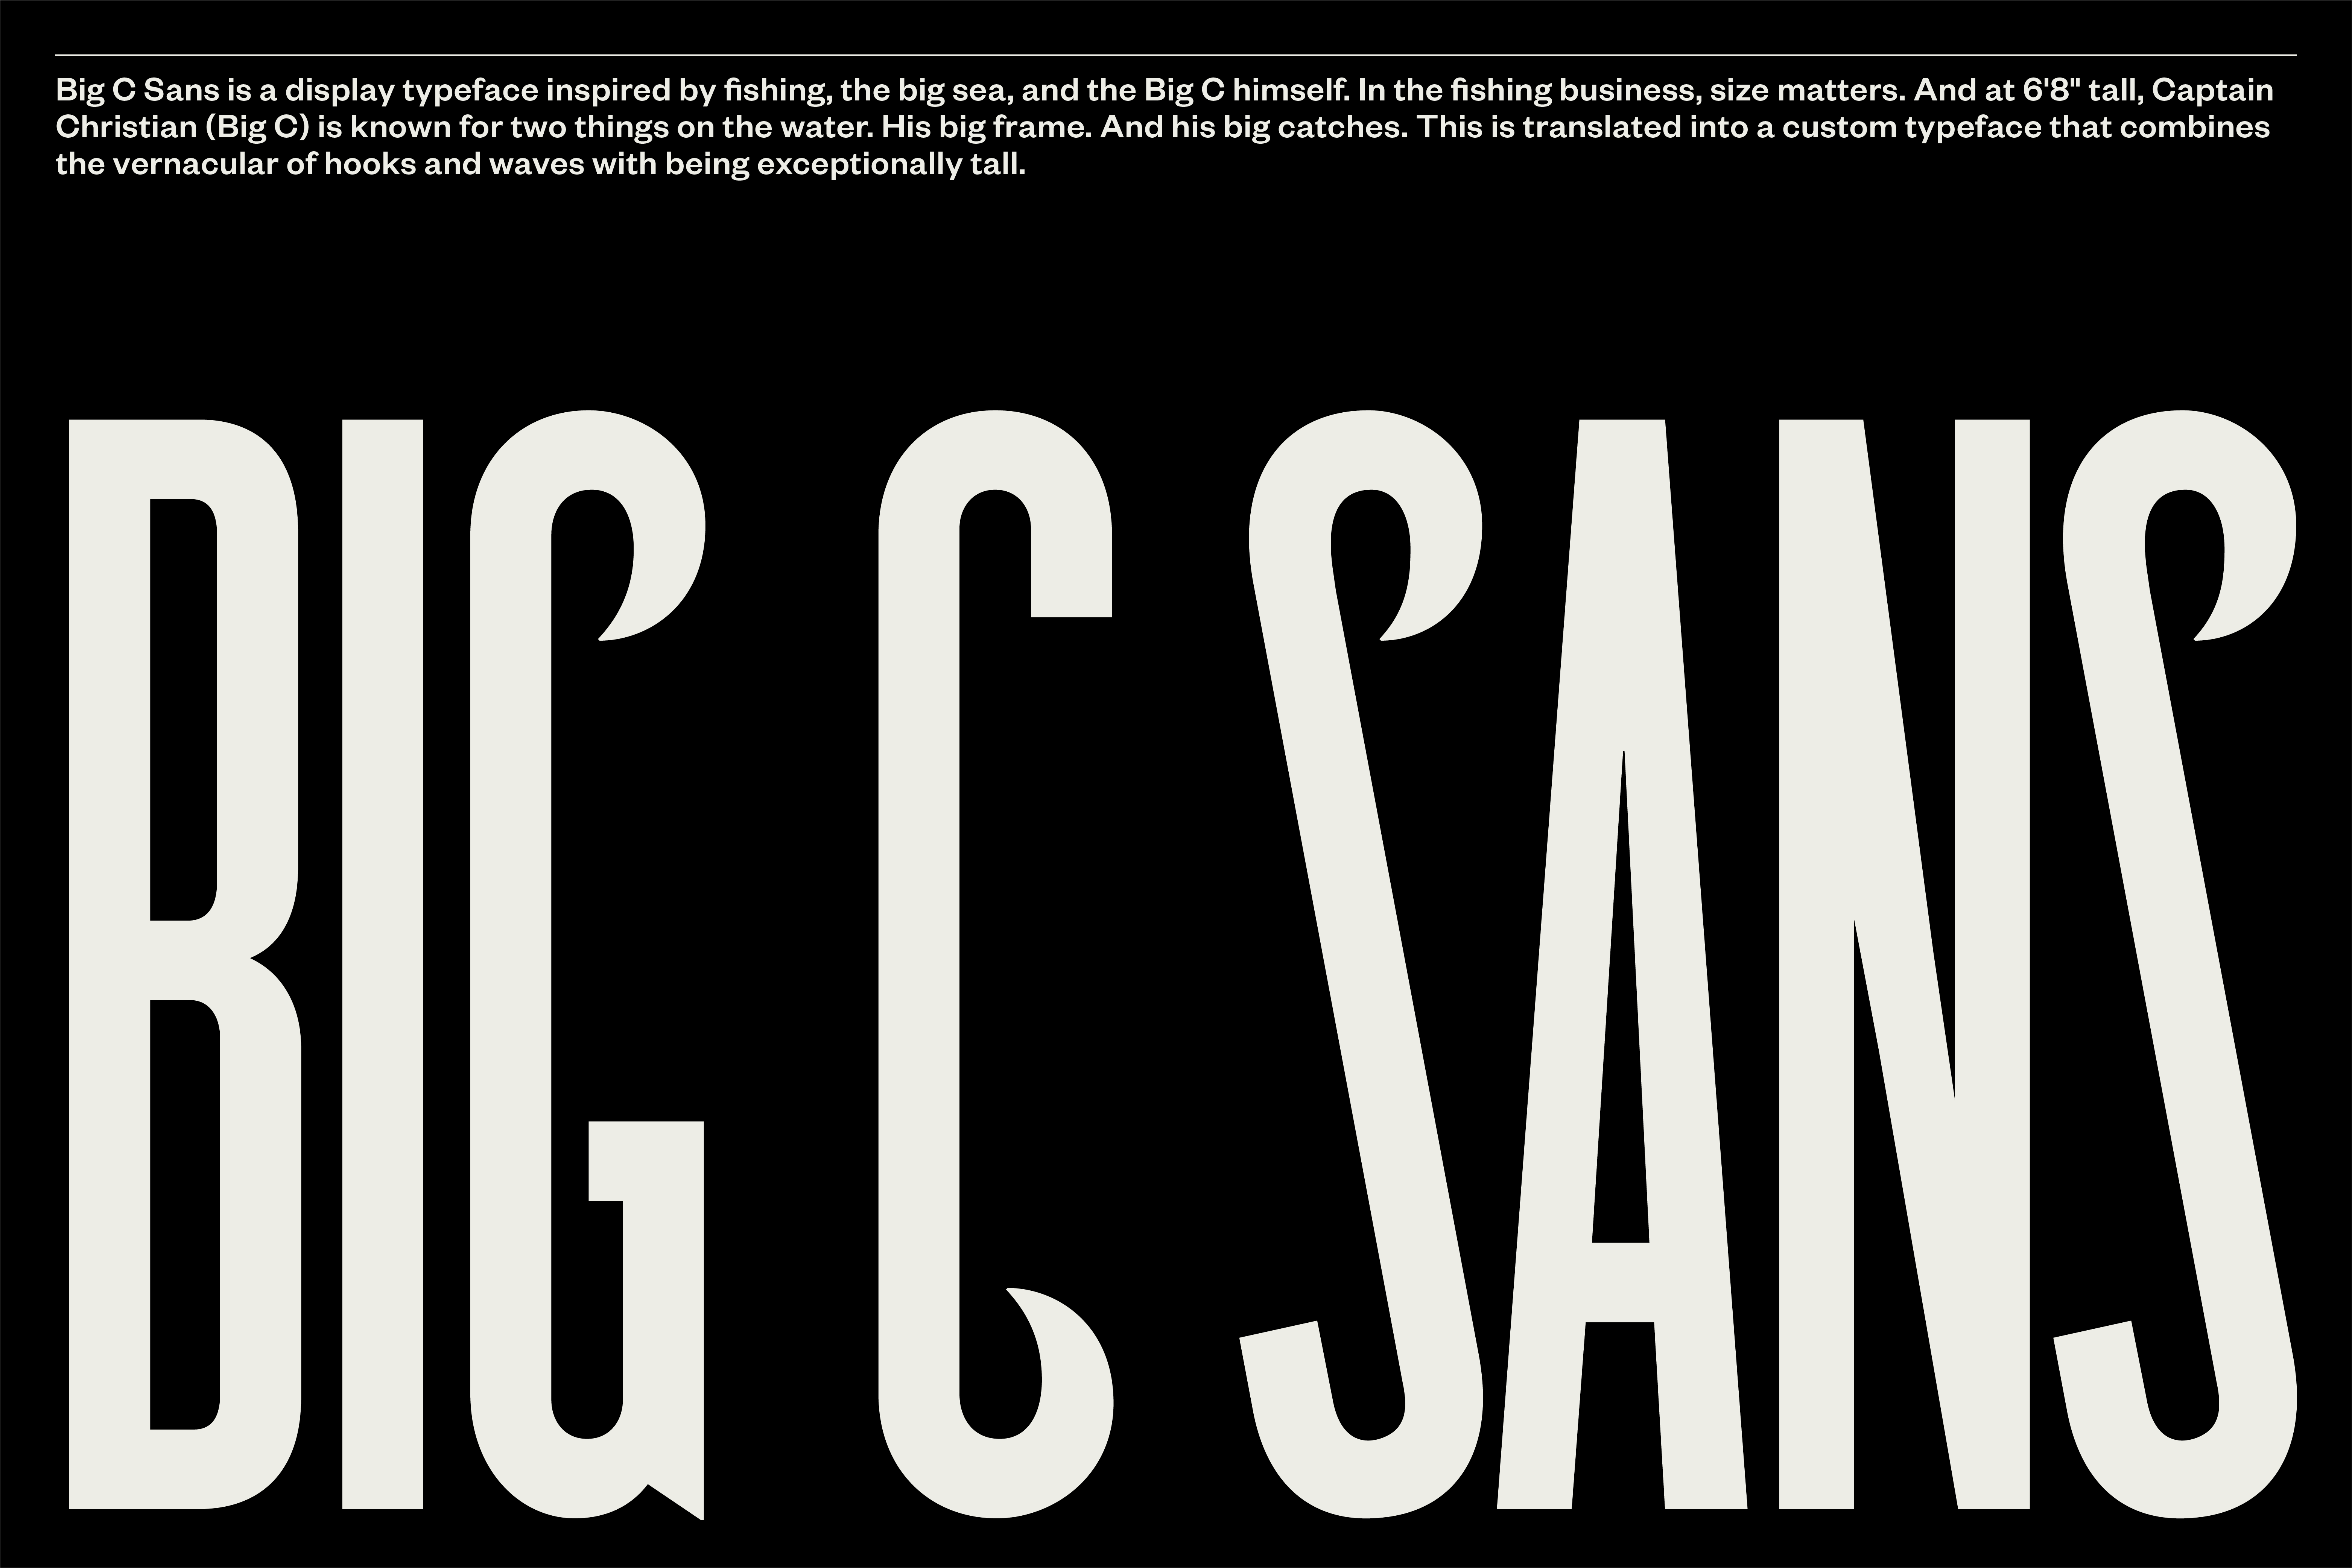 Condensed custom typeface designed by Mucho for San Francisco-based hands-on fishing trip and excursions business Big C Charters